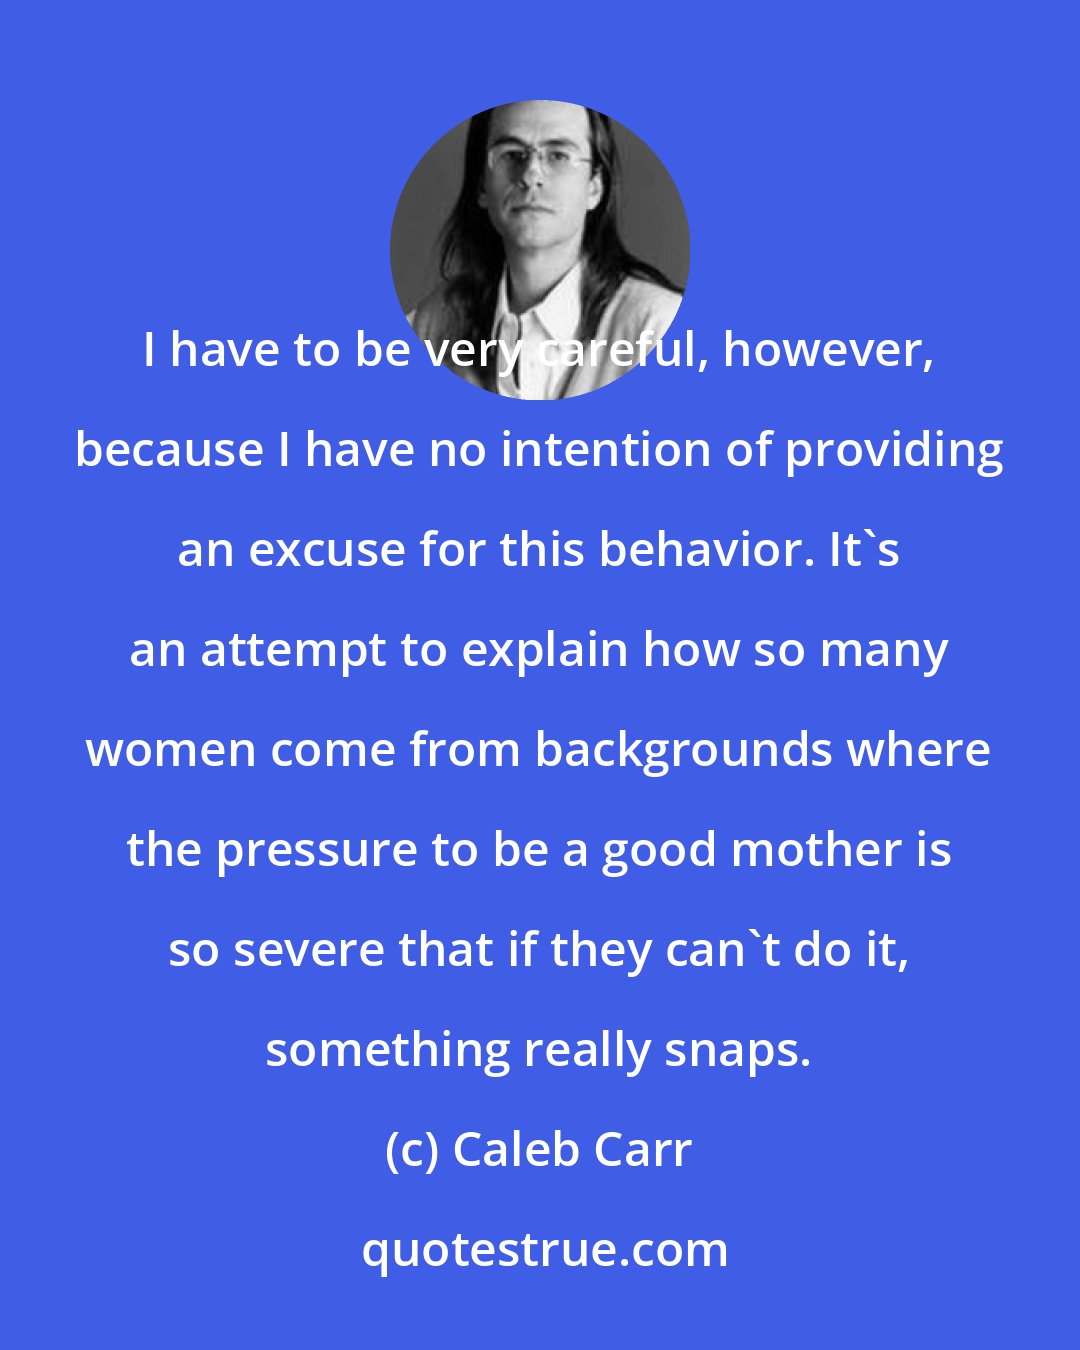 Caleb Carr: I have to be very careful, however, because I have no intention of providing an excuse for this behavior. It's an attempt to explain how so many women come from backgrounds where the pressure to be a good mother is so severe that if they can't do it, something really snaps.